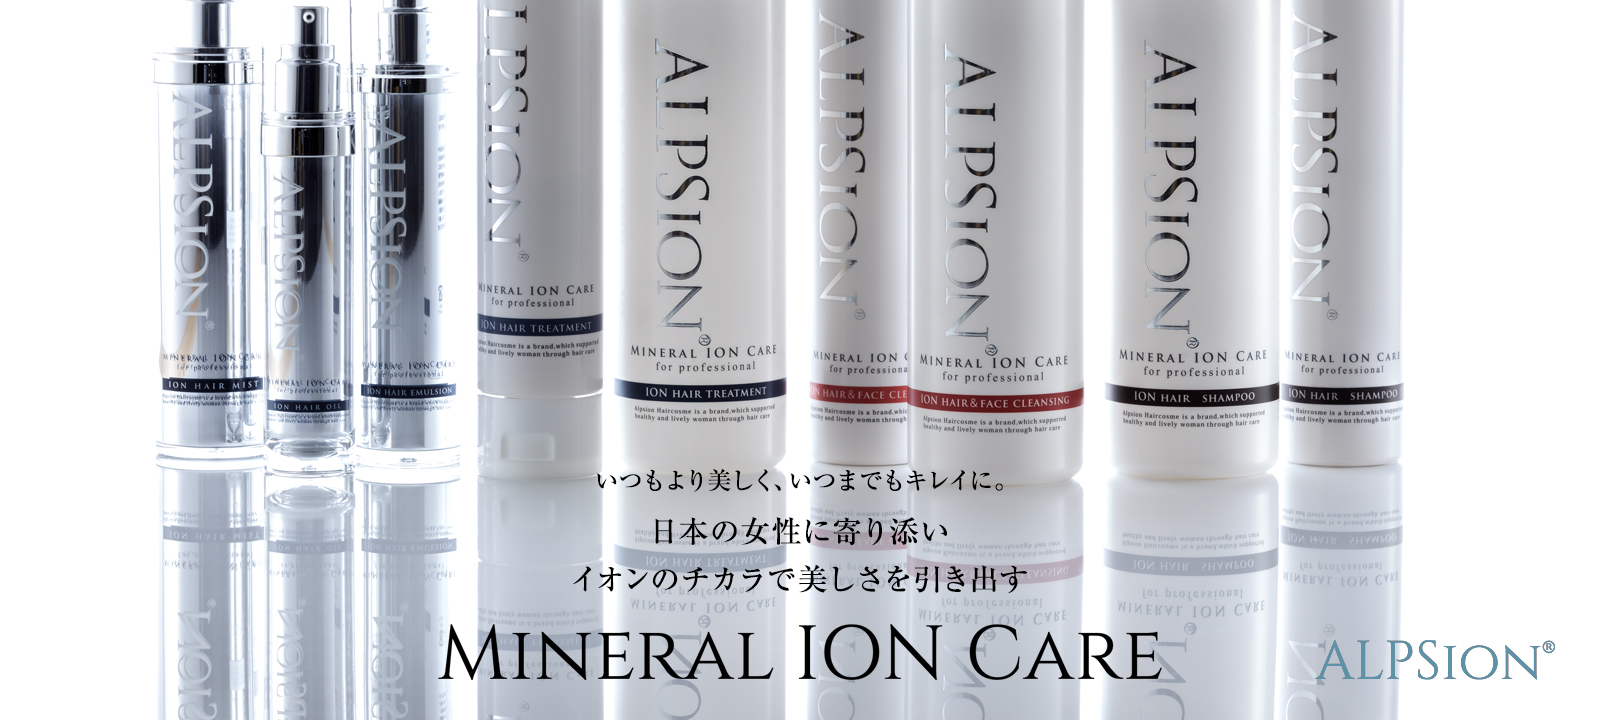 ALPSION MINERAL ION CARE（アルピジョン ミネラルイオンケア）